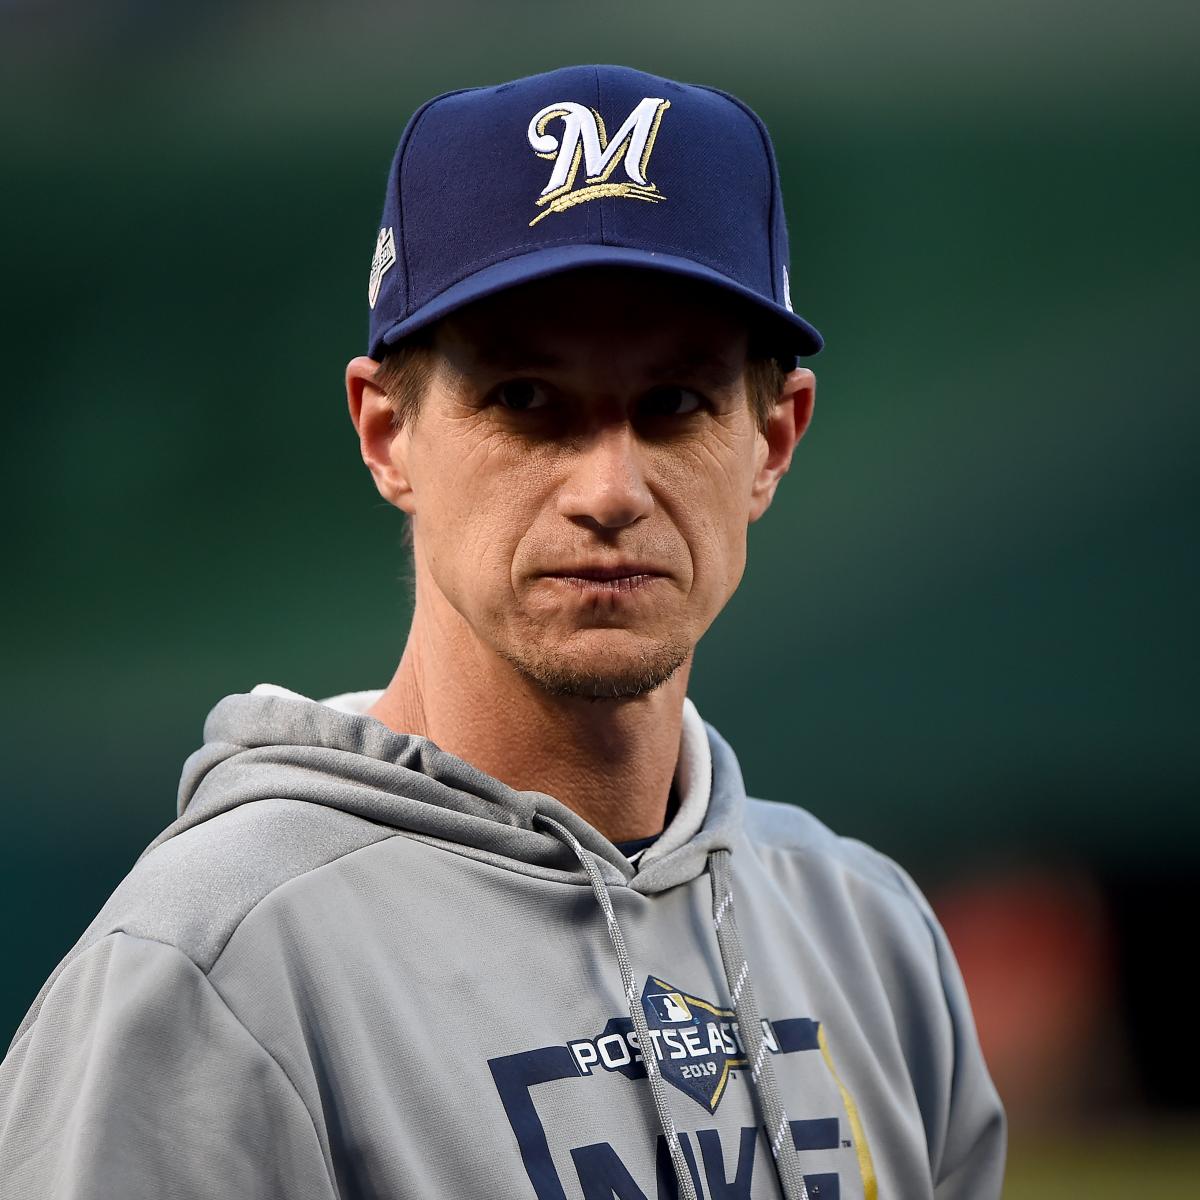 Will Craig Counsell reach 700 career wins with the Brewers?